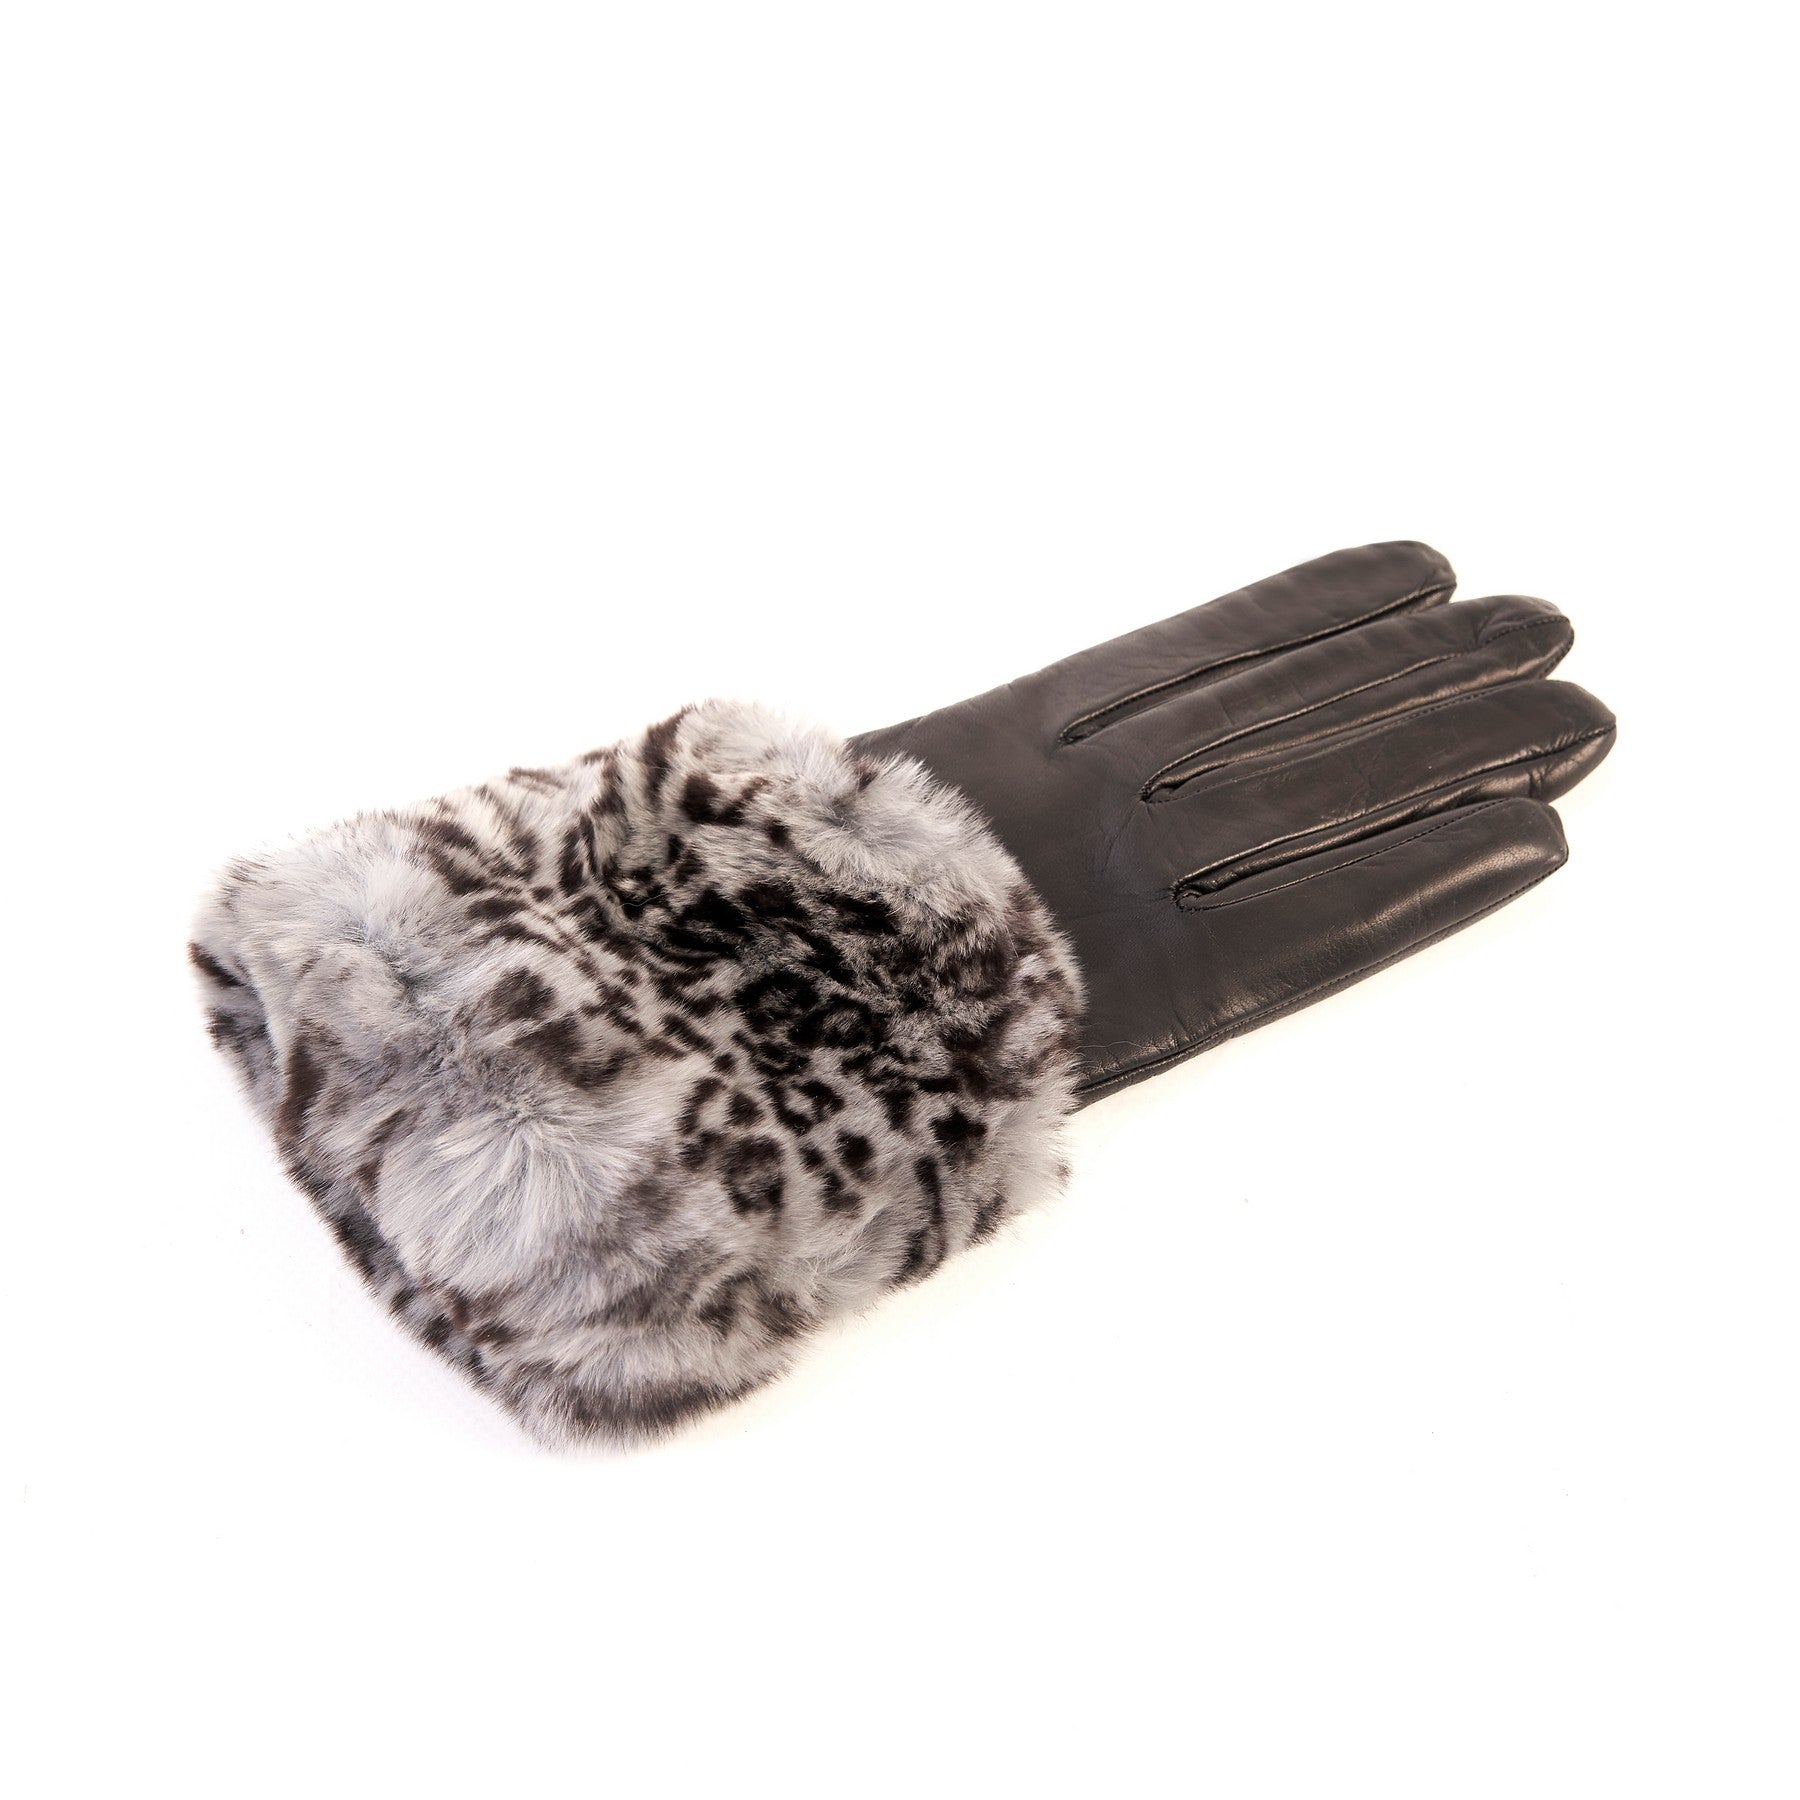 Women's black nappa leather gloves with a printed leo wide real fur panel on the top and cashmere lined